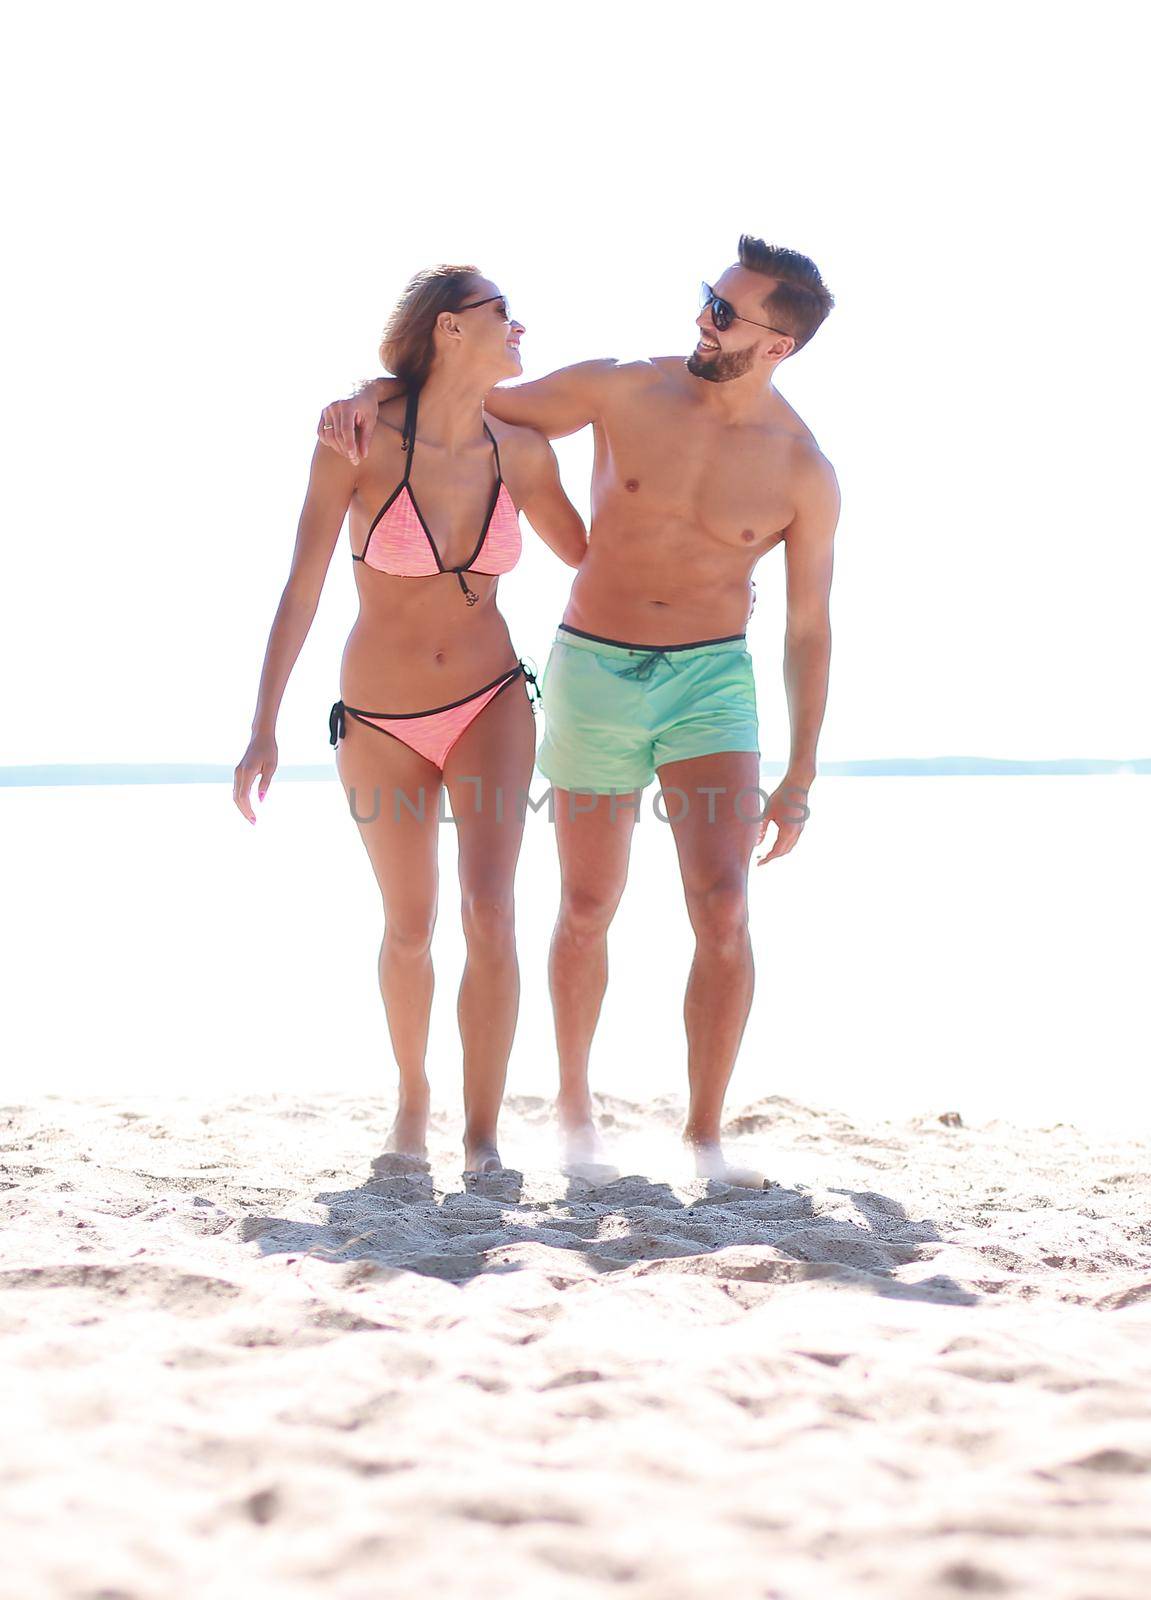 Happy fun beach vacations couple walking together laughing having fun on travel destination.